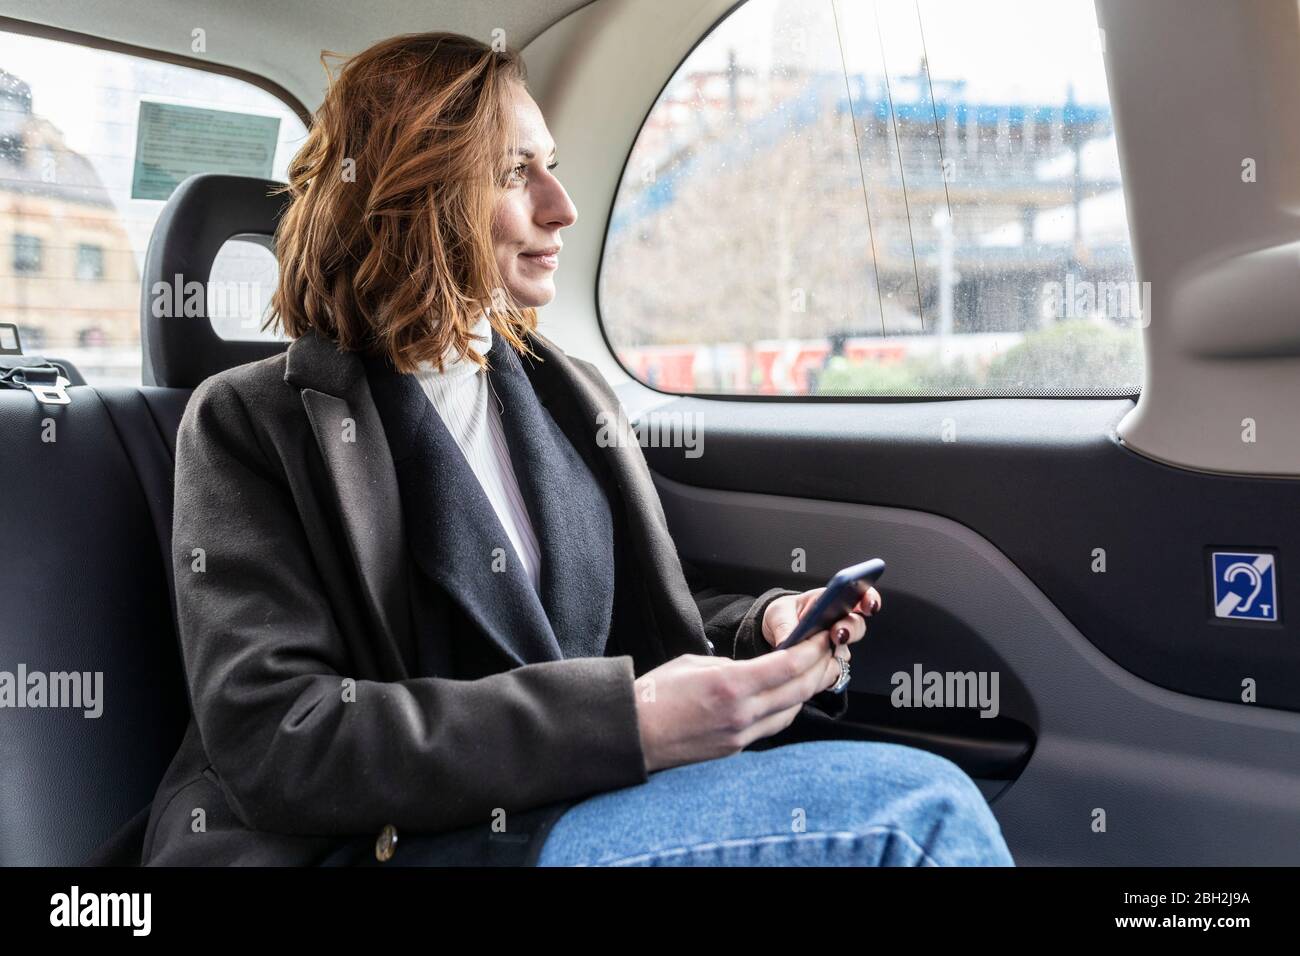 Businesswoman in the rear of a taxi looking out of the window, London, UK Stock Photo